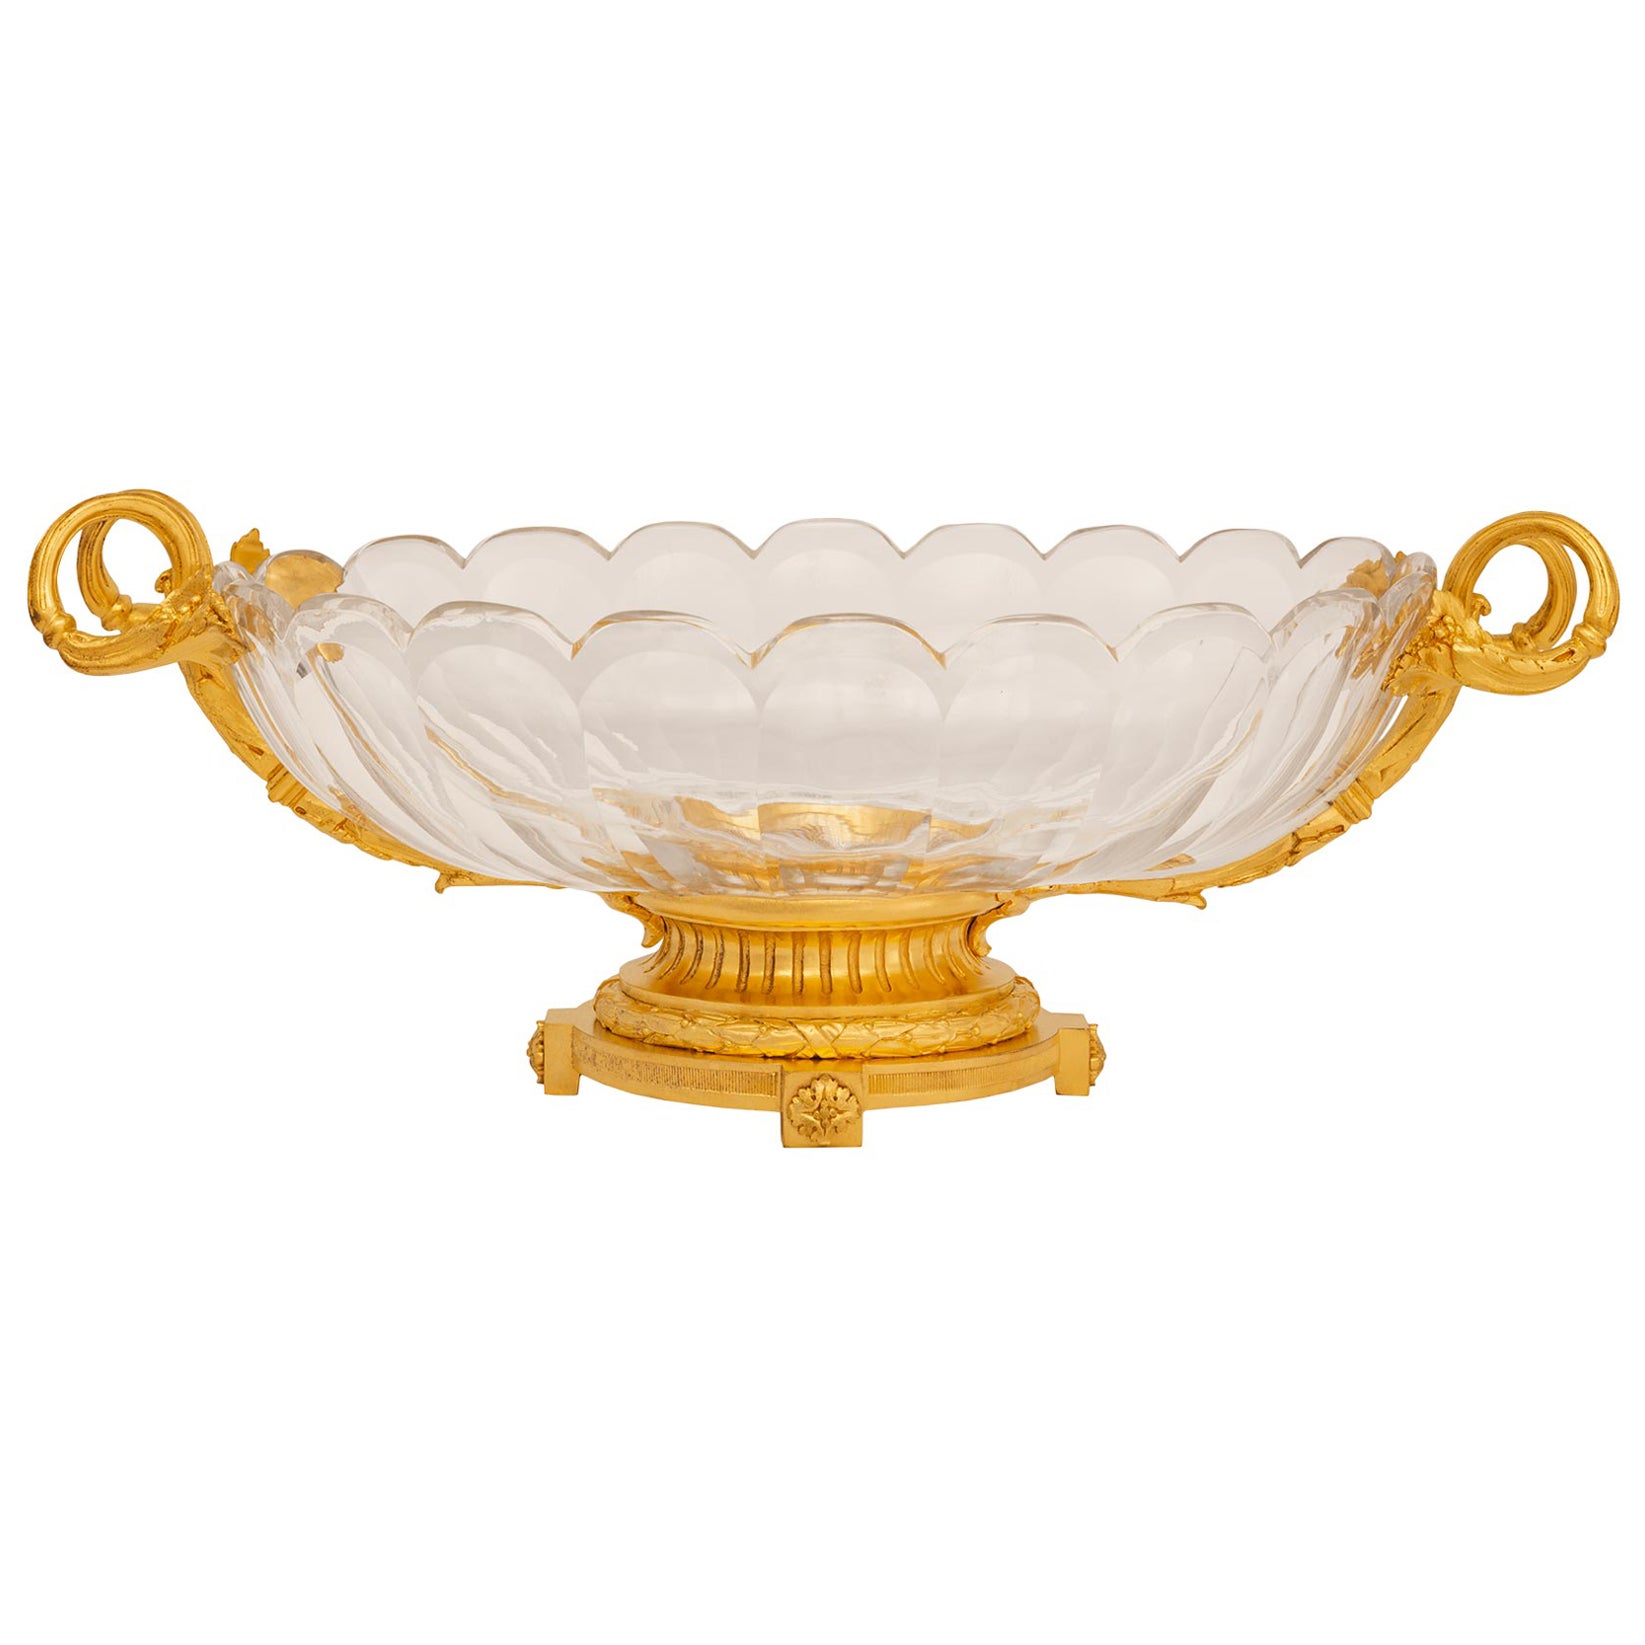 French 19th Century Belle Epoque Period Ormolu And Baccarat Crystal Centerpiece For Sale